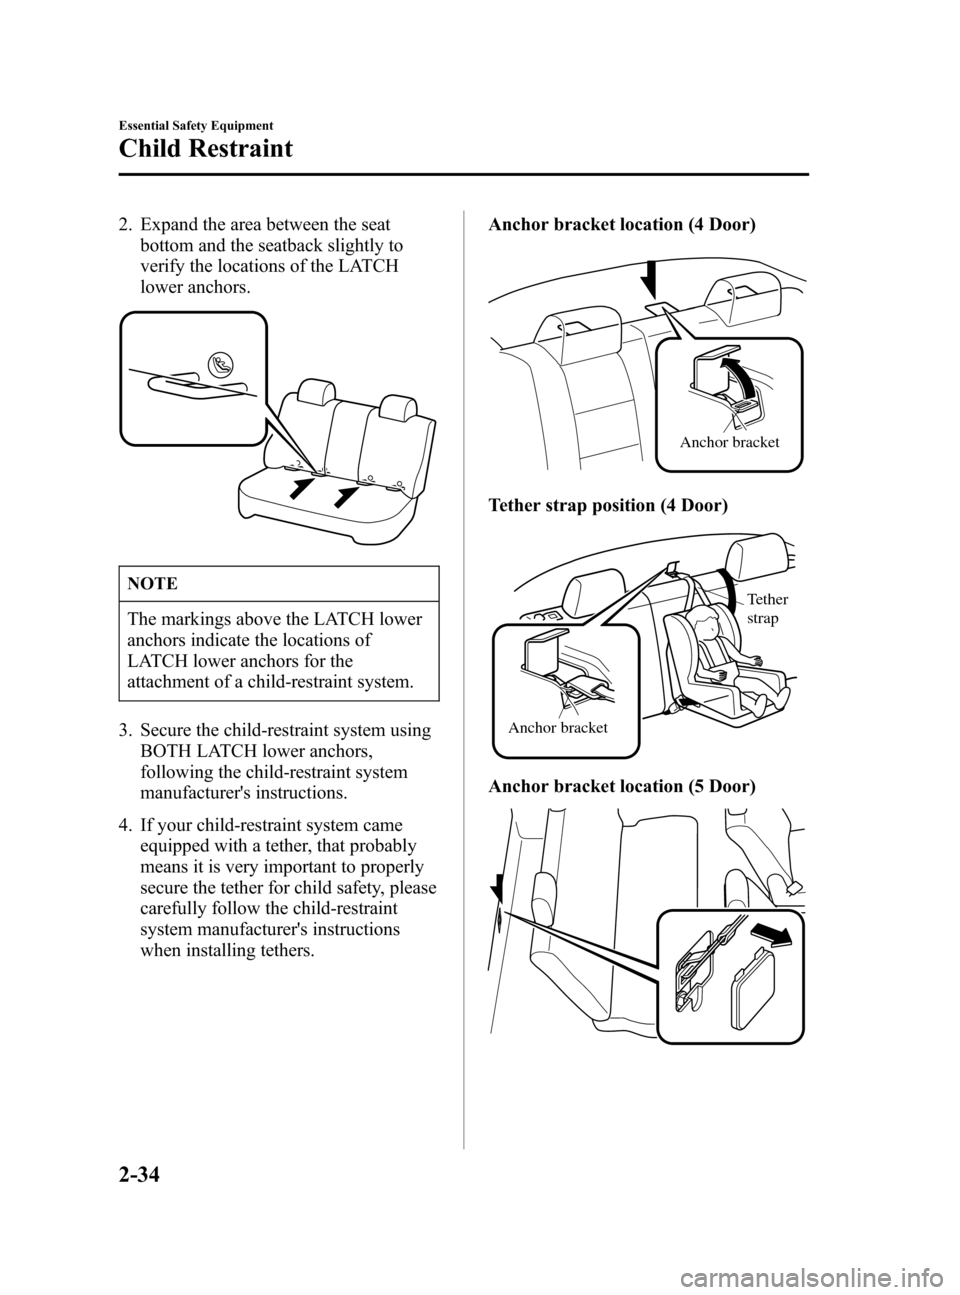 MAZDA MODEL 3 HATCHBACK 2005   (in English) Service Manual Black plate (48,1)
2. Expand the area between the seat
bottom and the seatback slightly to
verify the locations of the LATCH
lower anchors.
NOTE
The markings above the LATCH lower
anchors indicate the